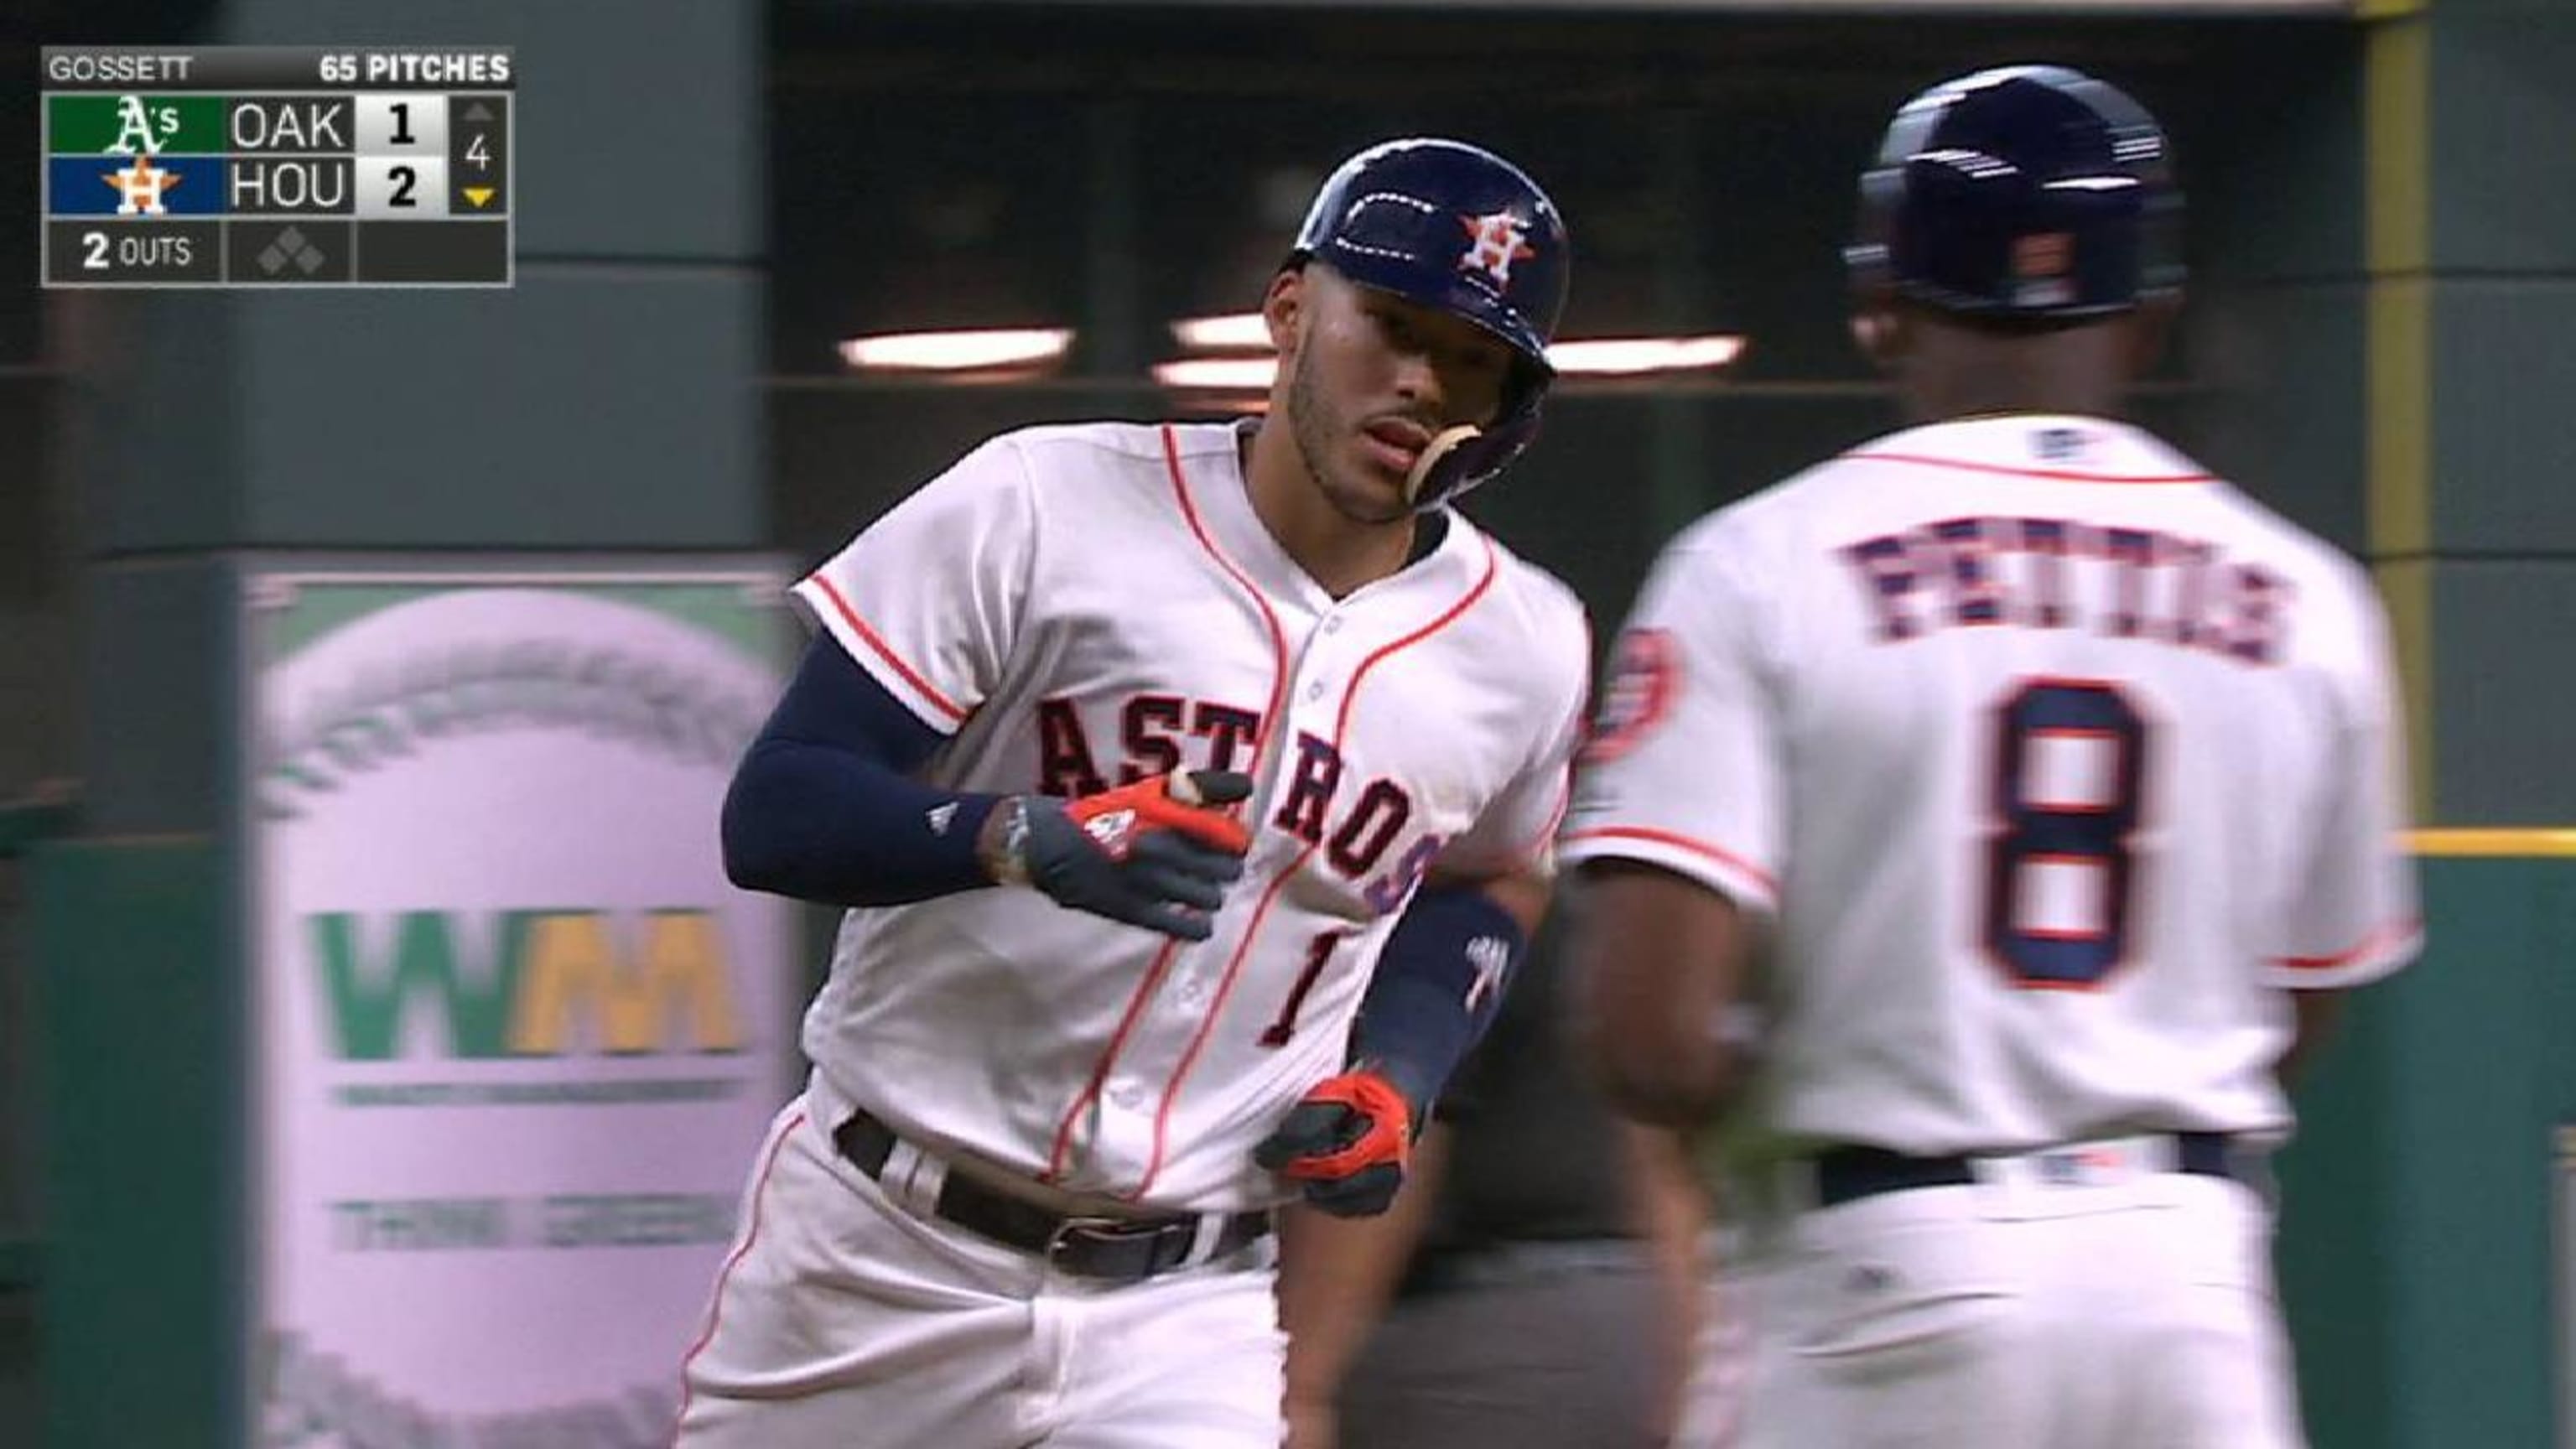 Carlos Correa has 2 HRs, 4 RBIs to lead Astros over A's